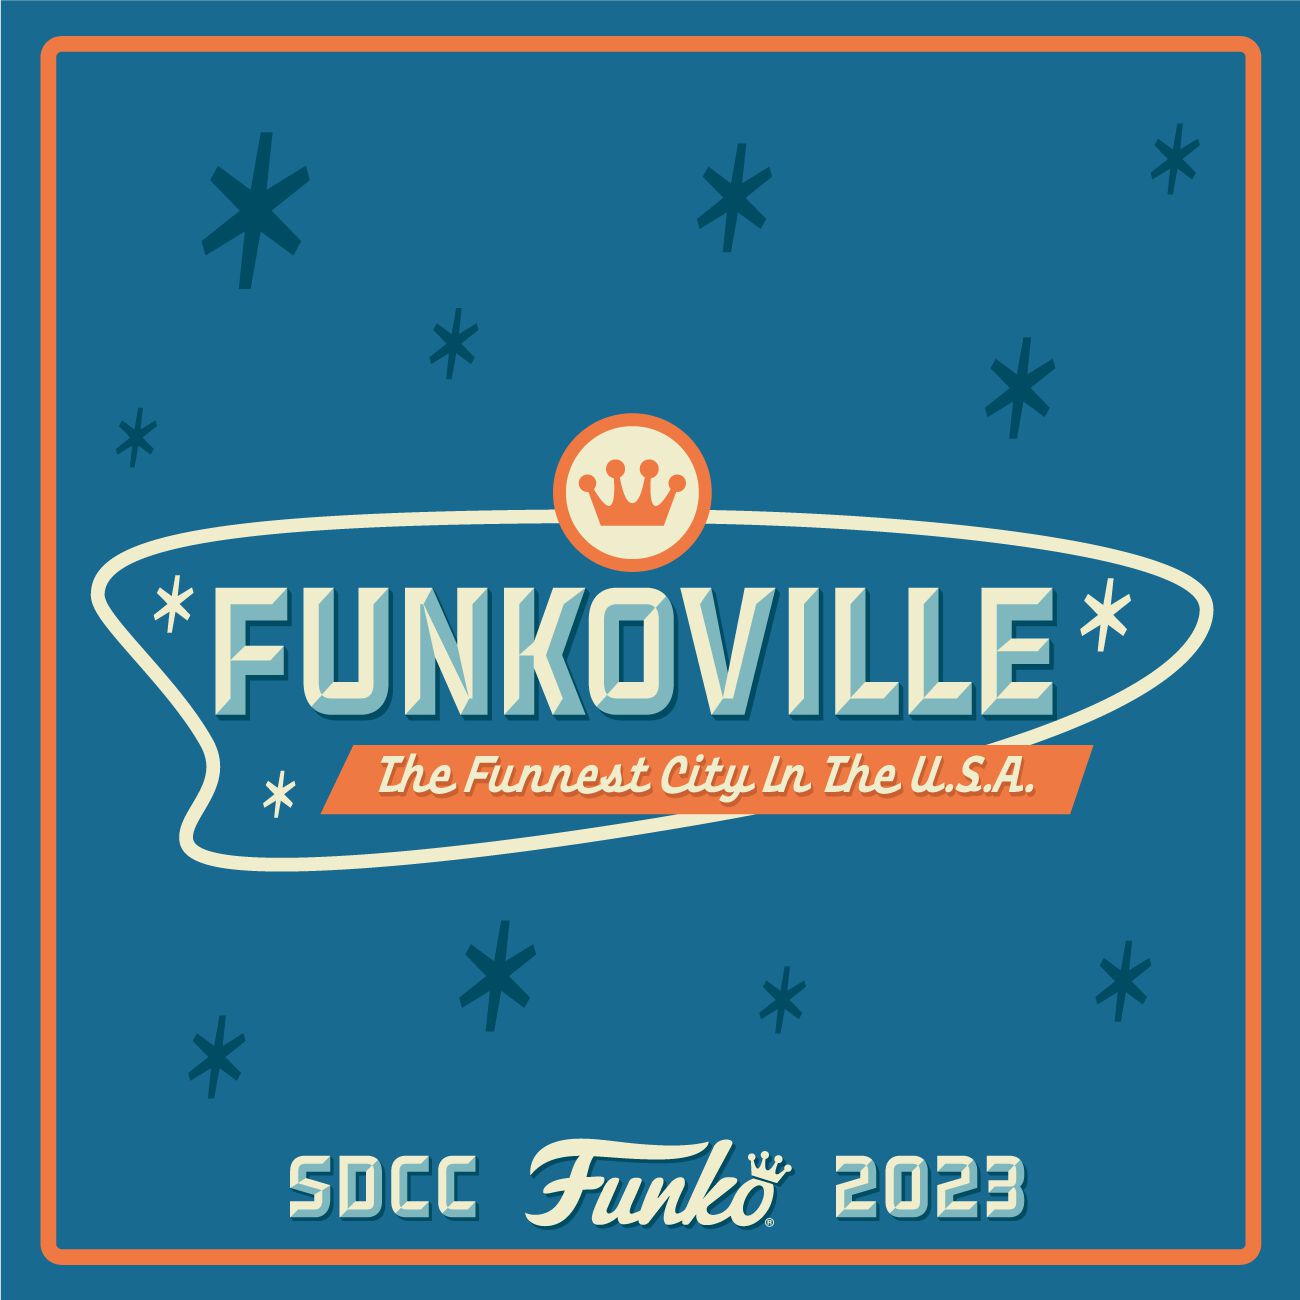 Thanks for Visiting Funkoville at SDCC 2023